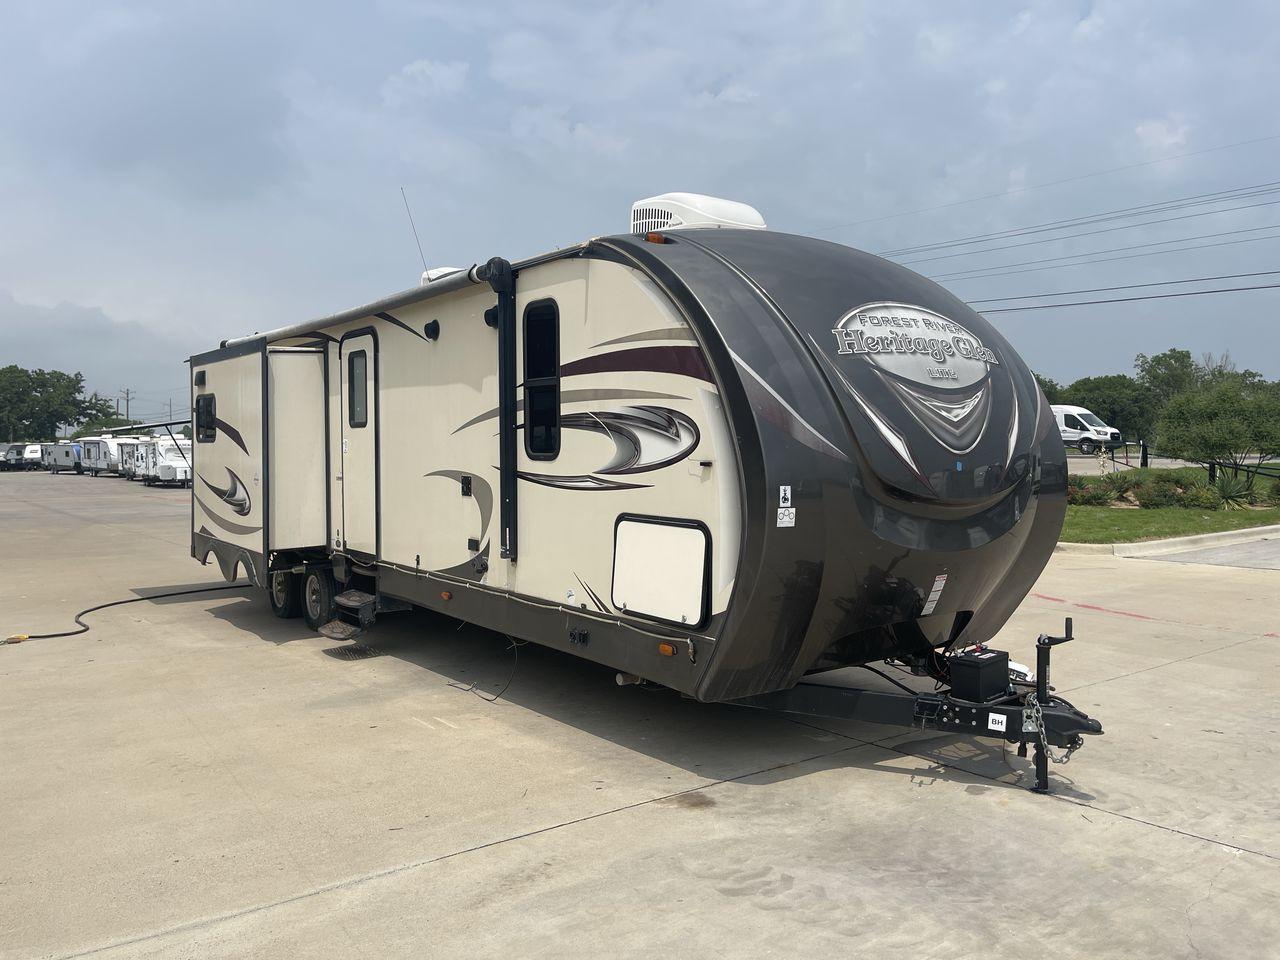 2017 TAN WILDWOOD HERITAGE GLEN 300BH (4X4TWBF29HU) , Length: 37.42 ft. | Dry Weight: 8,439 lbs. | Slides: 3 transmission, located at 4319 N Main Street, Cleburne, TX, 76033, (817) 221-0660, 32.435829, -97.384178 - The 2017 Wildwood Heritage Glen 300BH has roomy and comfortable rooms for your outdoor activities. This travel trailer offers ample space for the entire family, measuring 37.42 feet in length and weighing 8,439 pounds when dry. This trailer is designed with three slides, providing ample interior spa - Photo #23